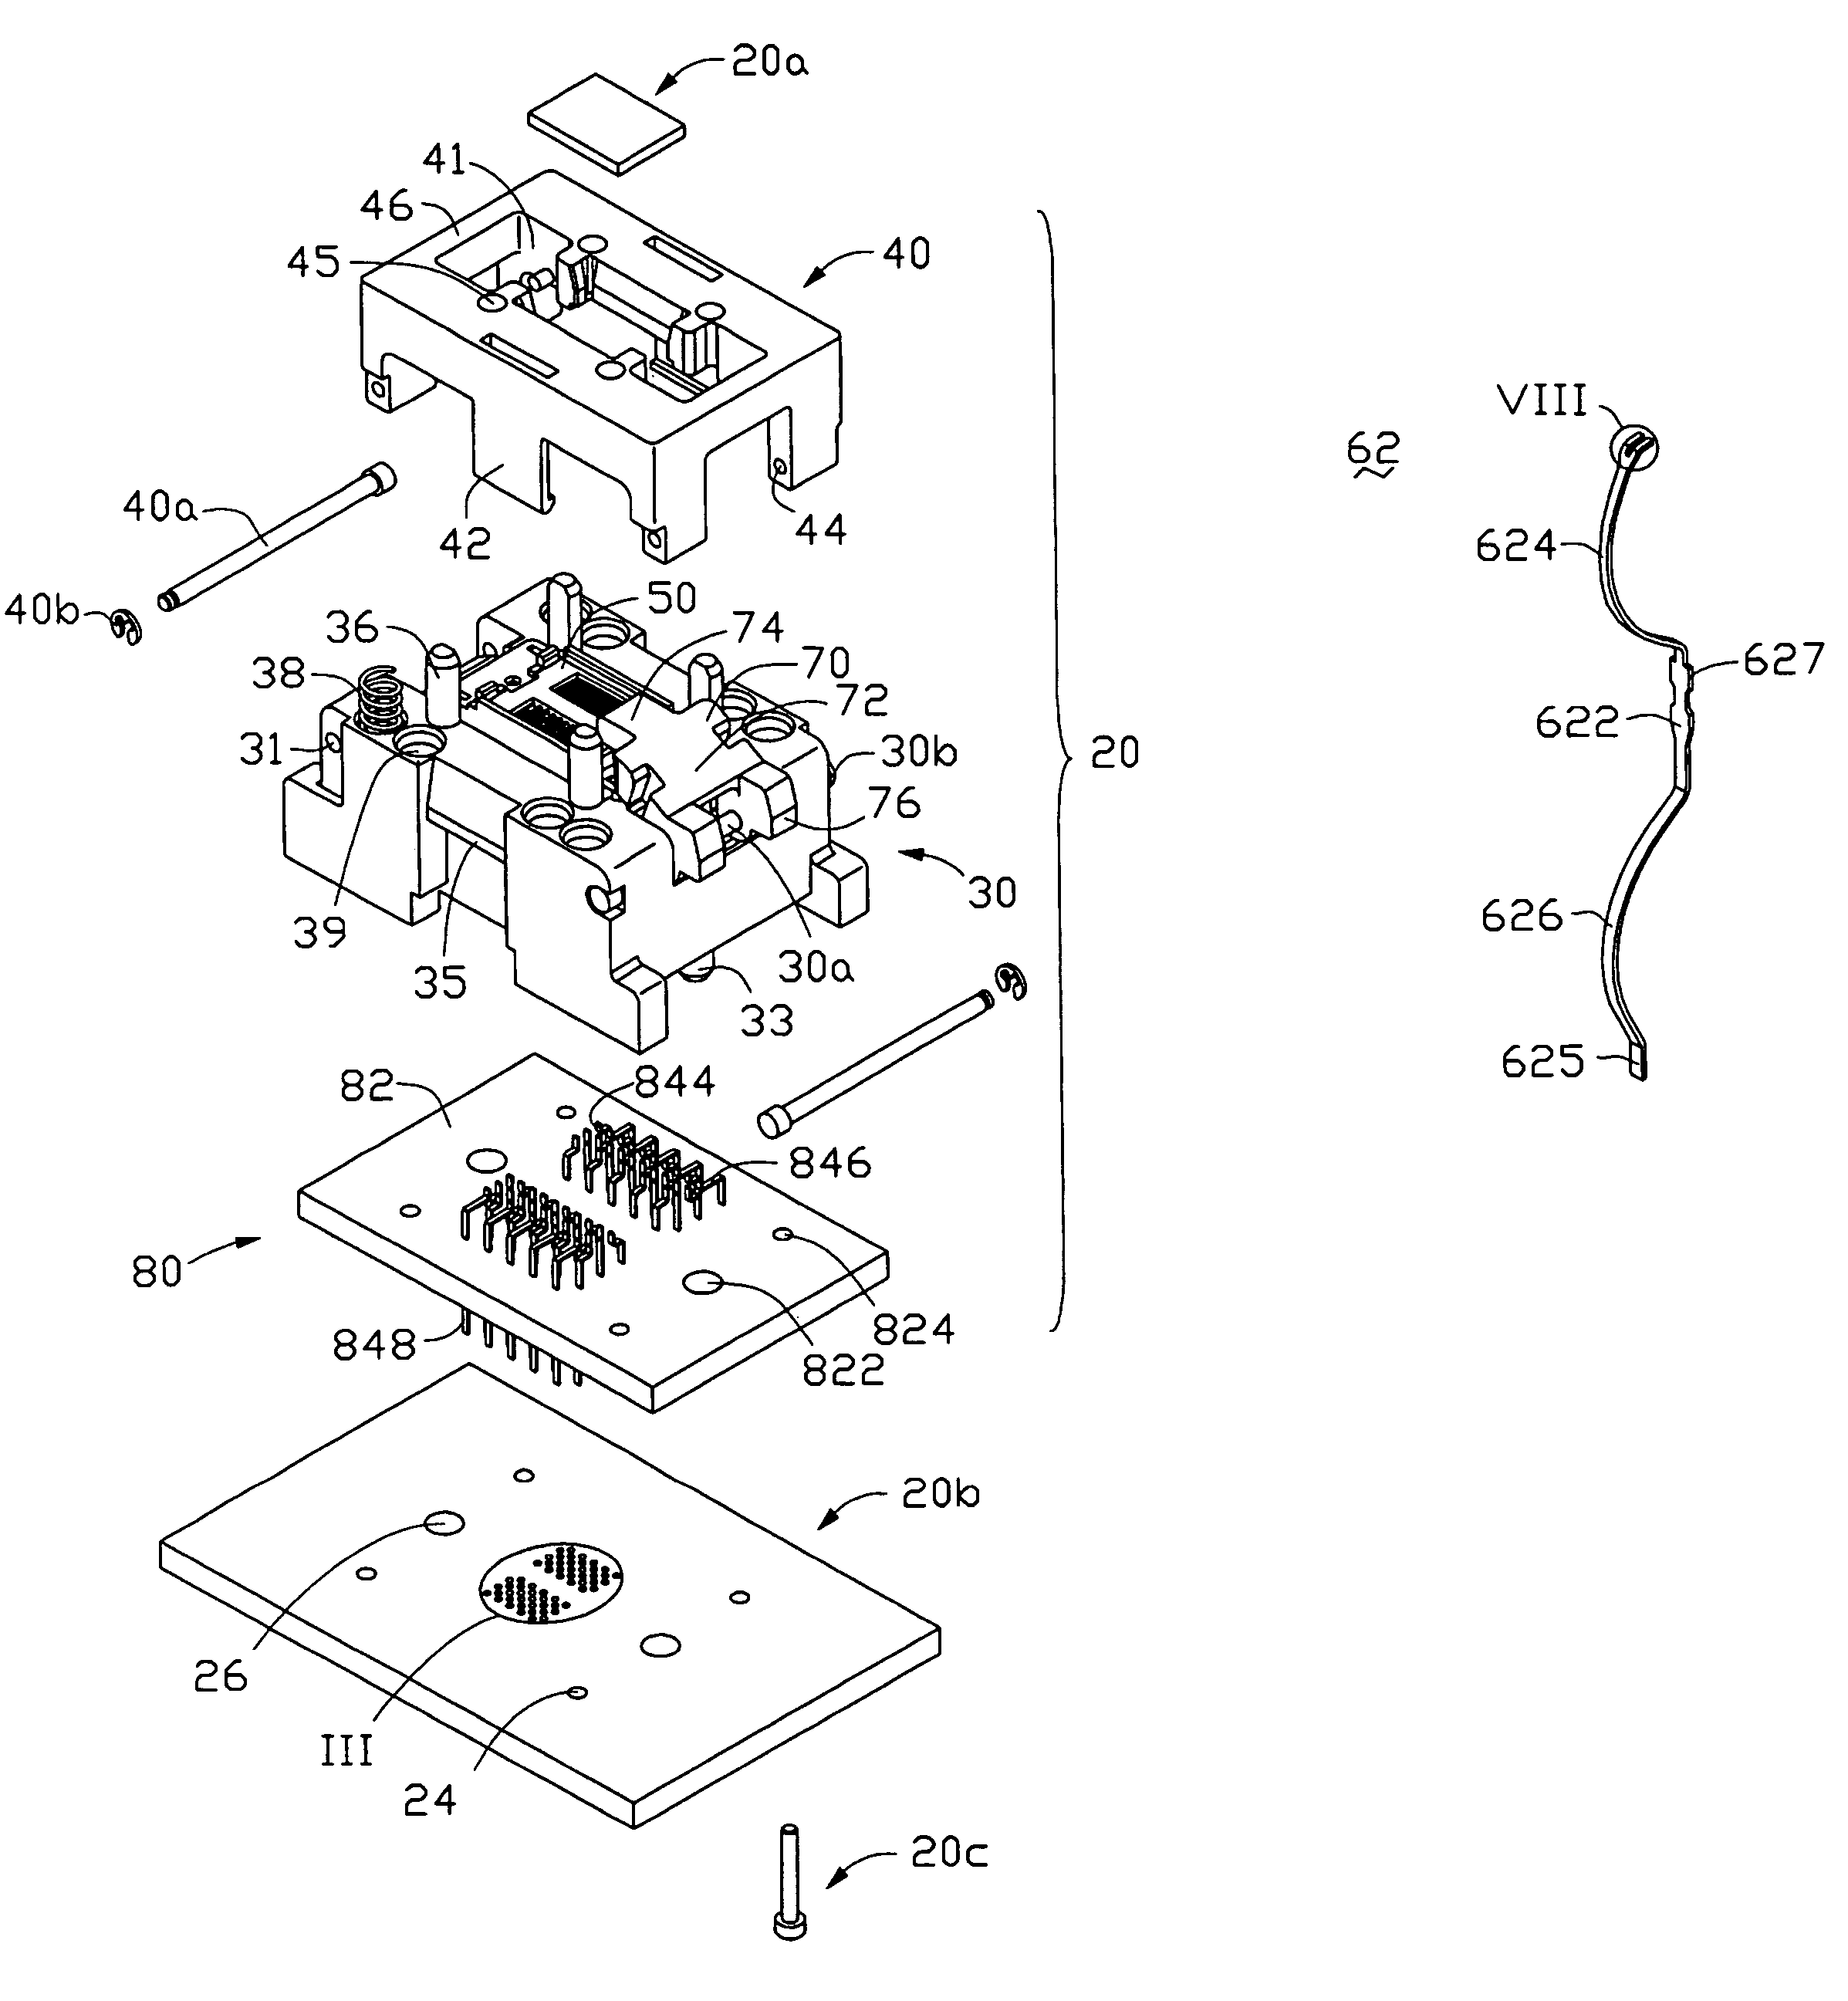 Electrical connector with different pitch terminals